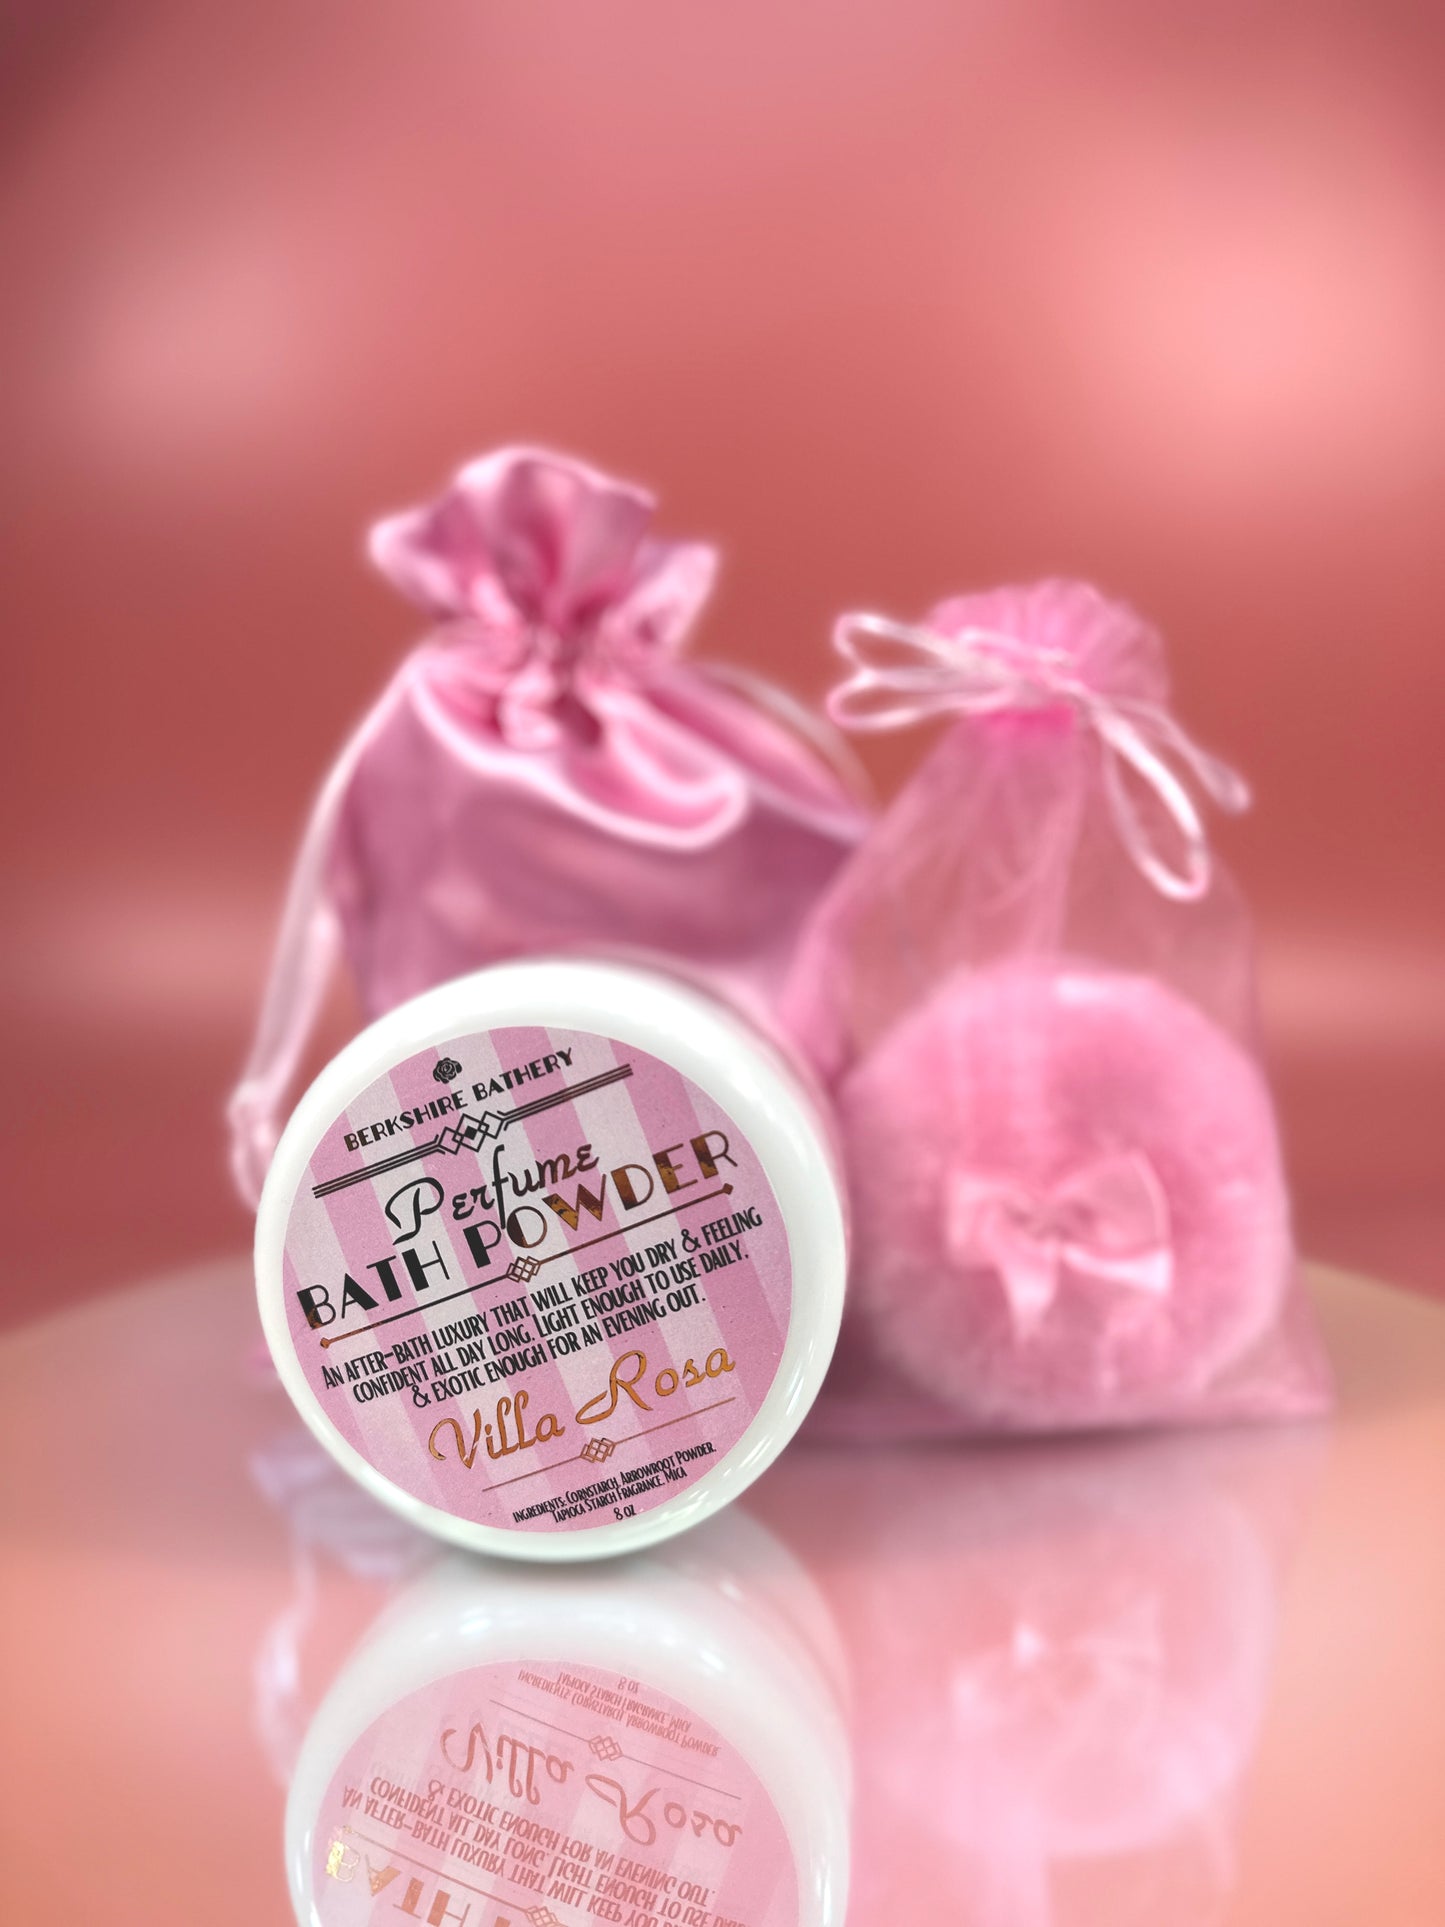 Load image into Gallery viewer, VILLA ROSA | Vintage Style Perfumed Body Powder + Pink Puff Applicator - 8 oz
